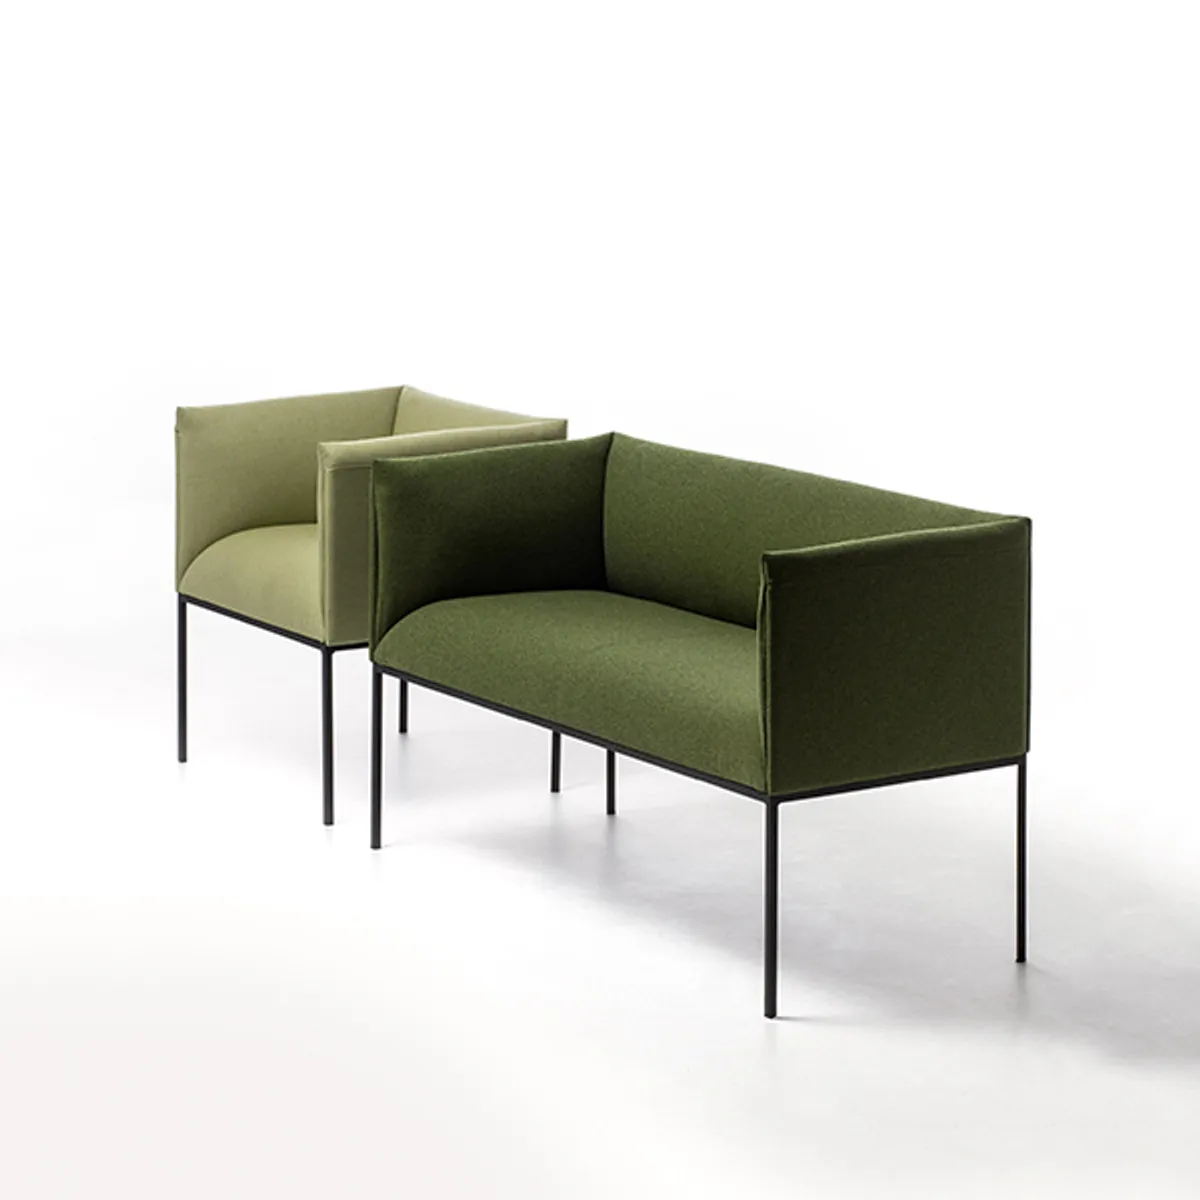 Neat Sofa Chair Greenfabric Boxy Inside Out Contracts